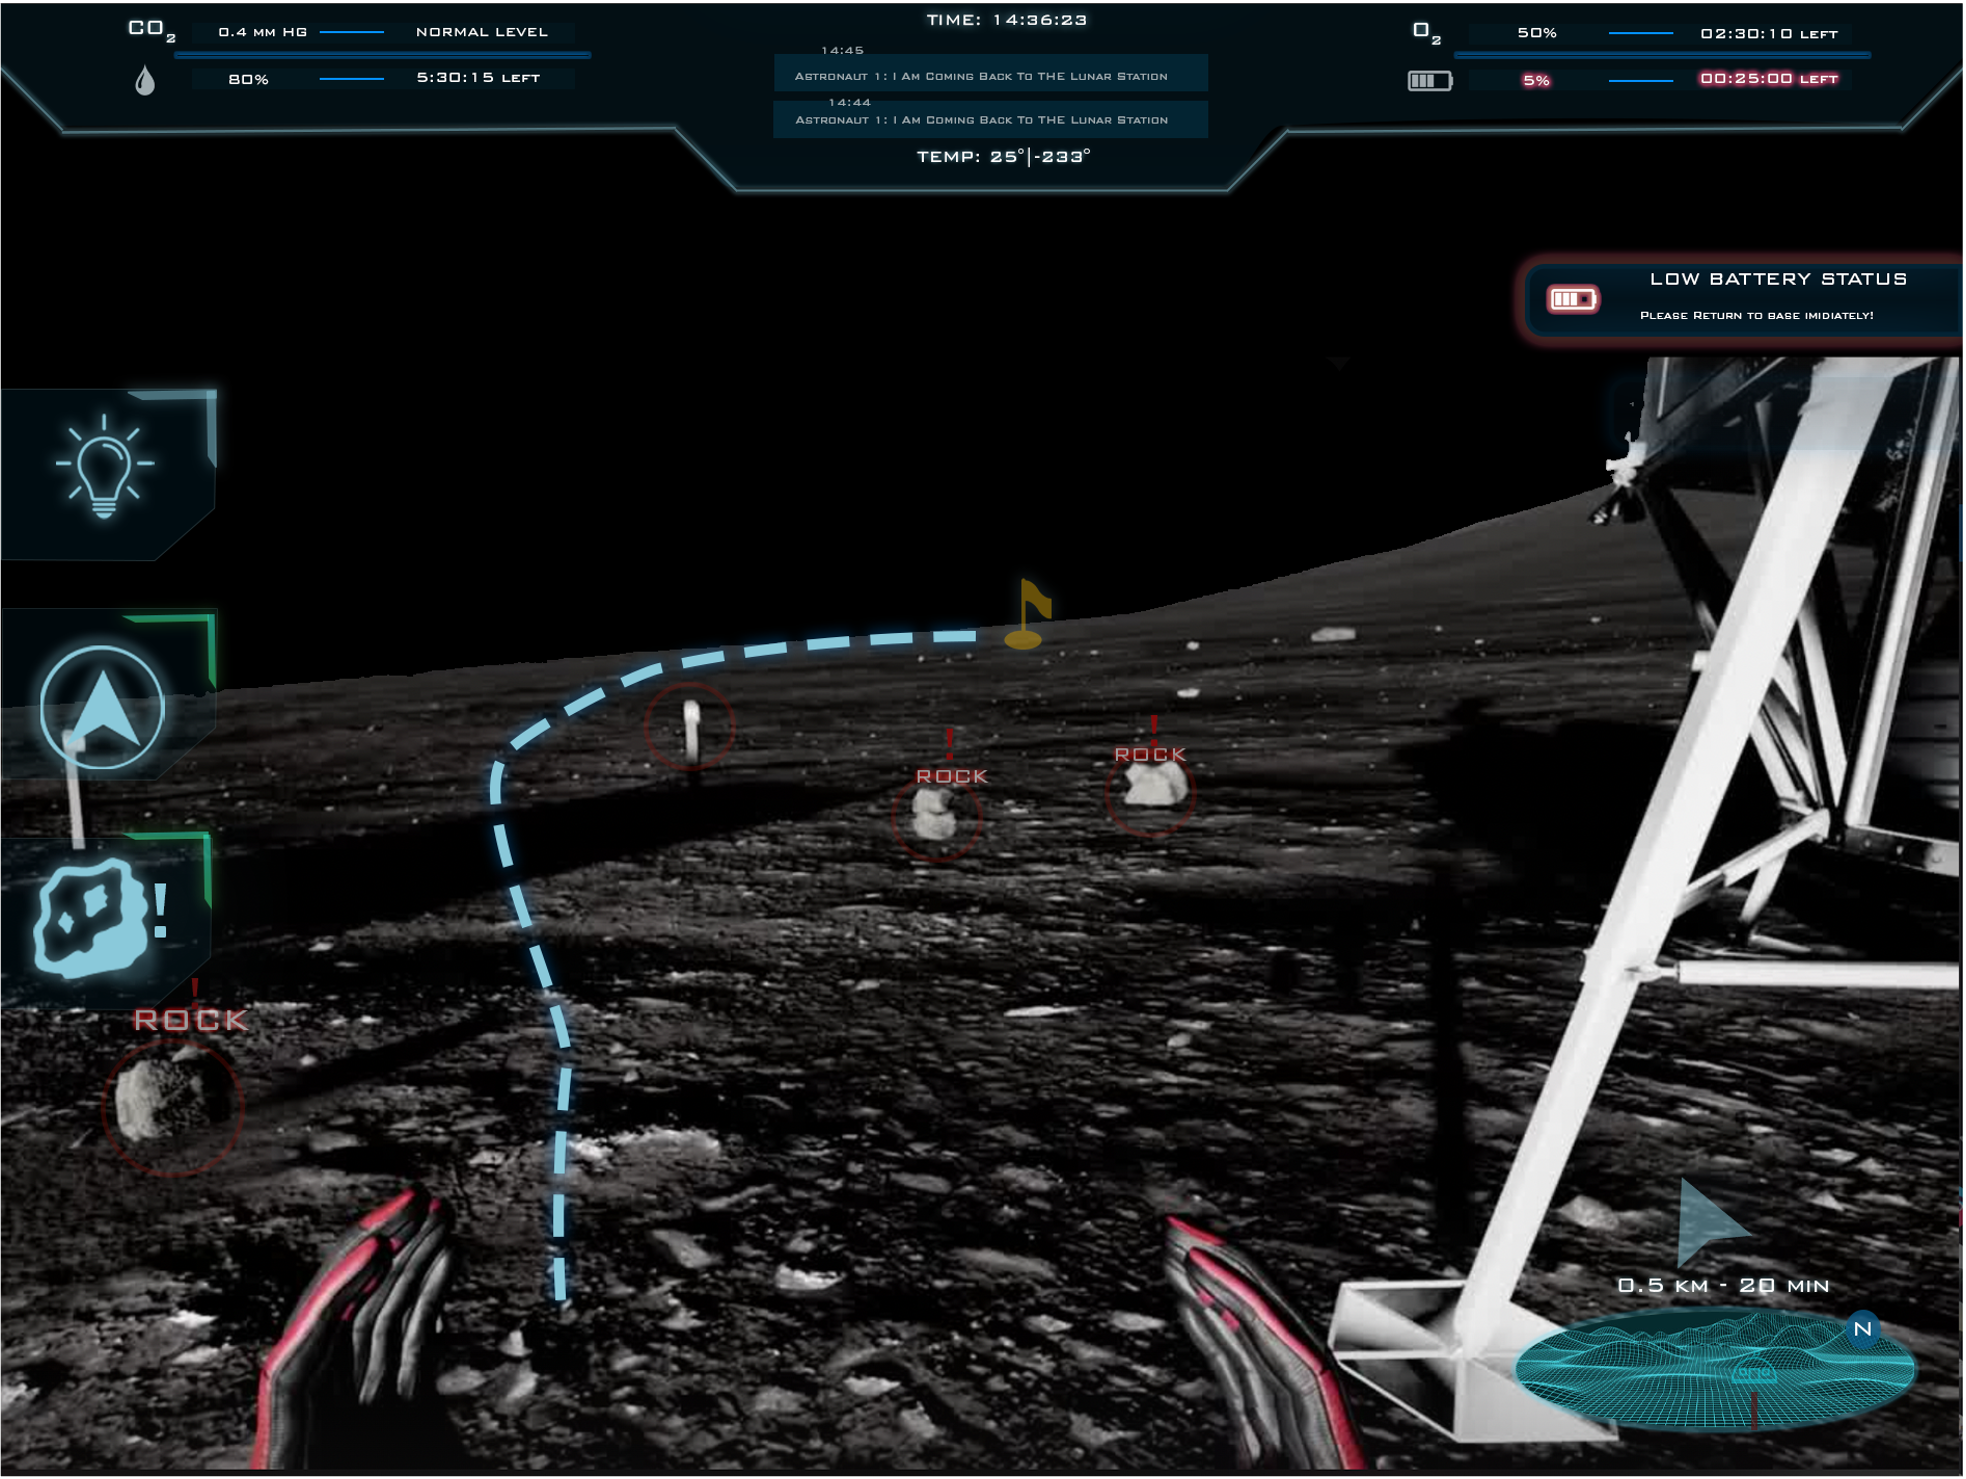 Designing for Human Operations on the Moon: Challenges and Opportunities of Navigational HUD Interfaces